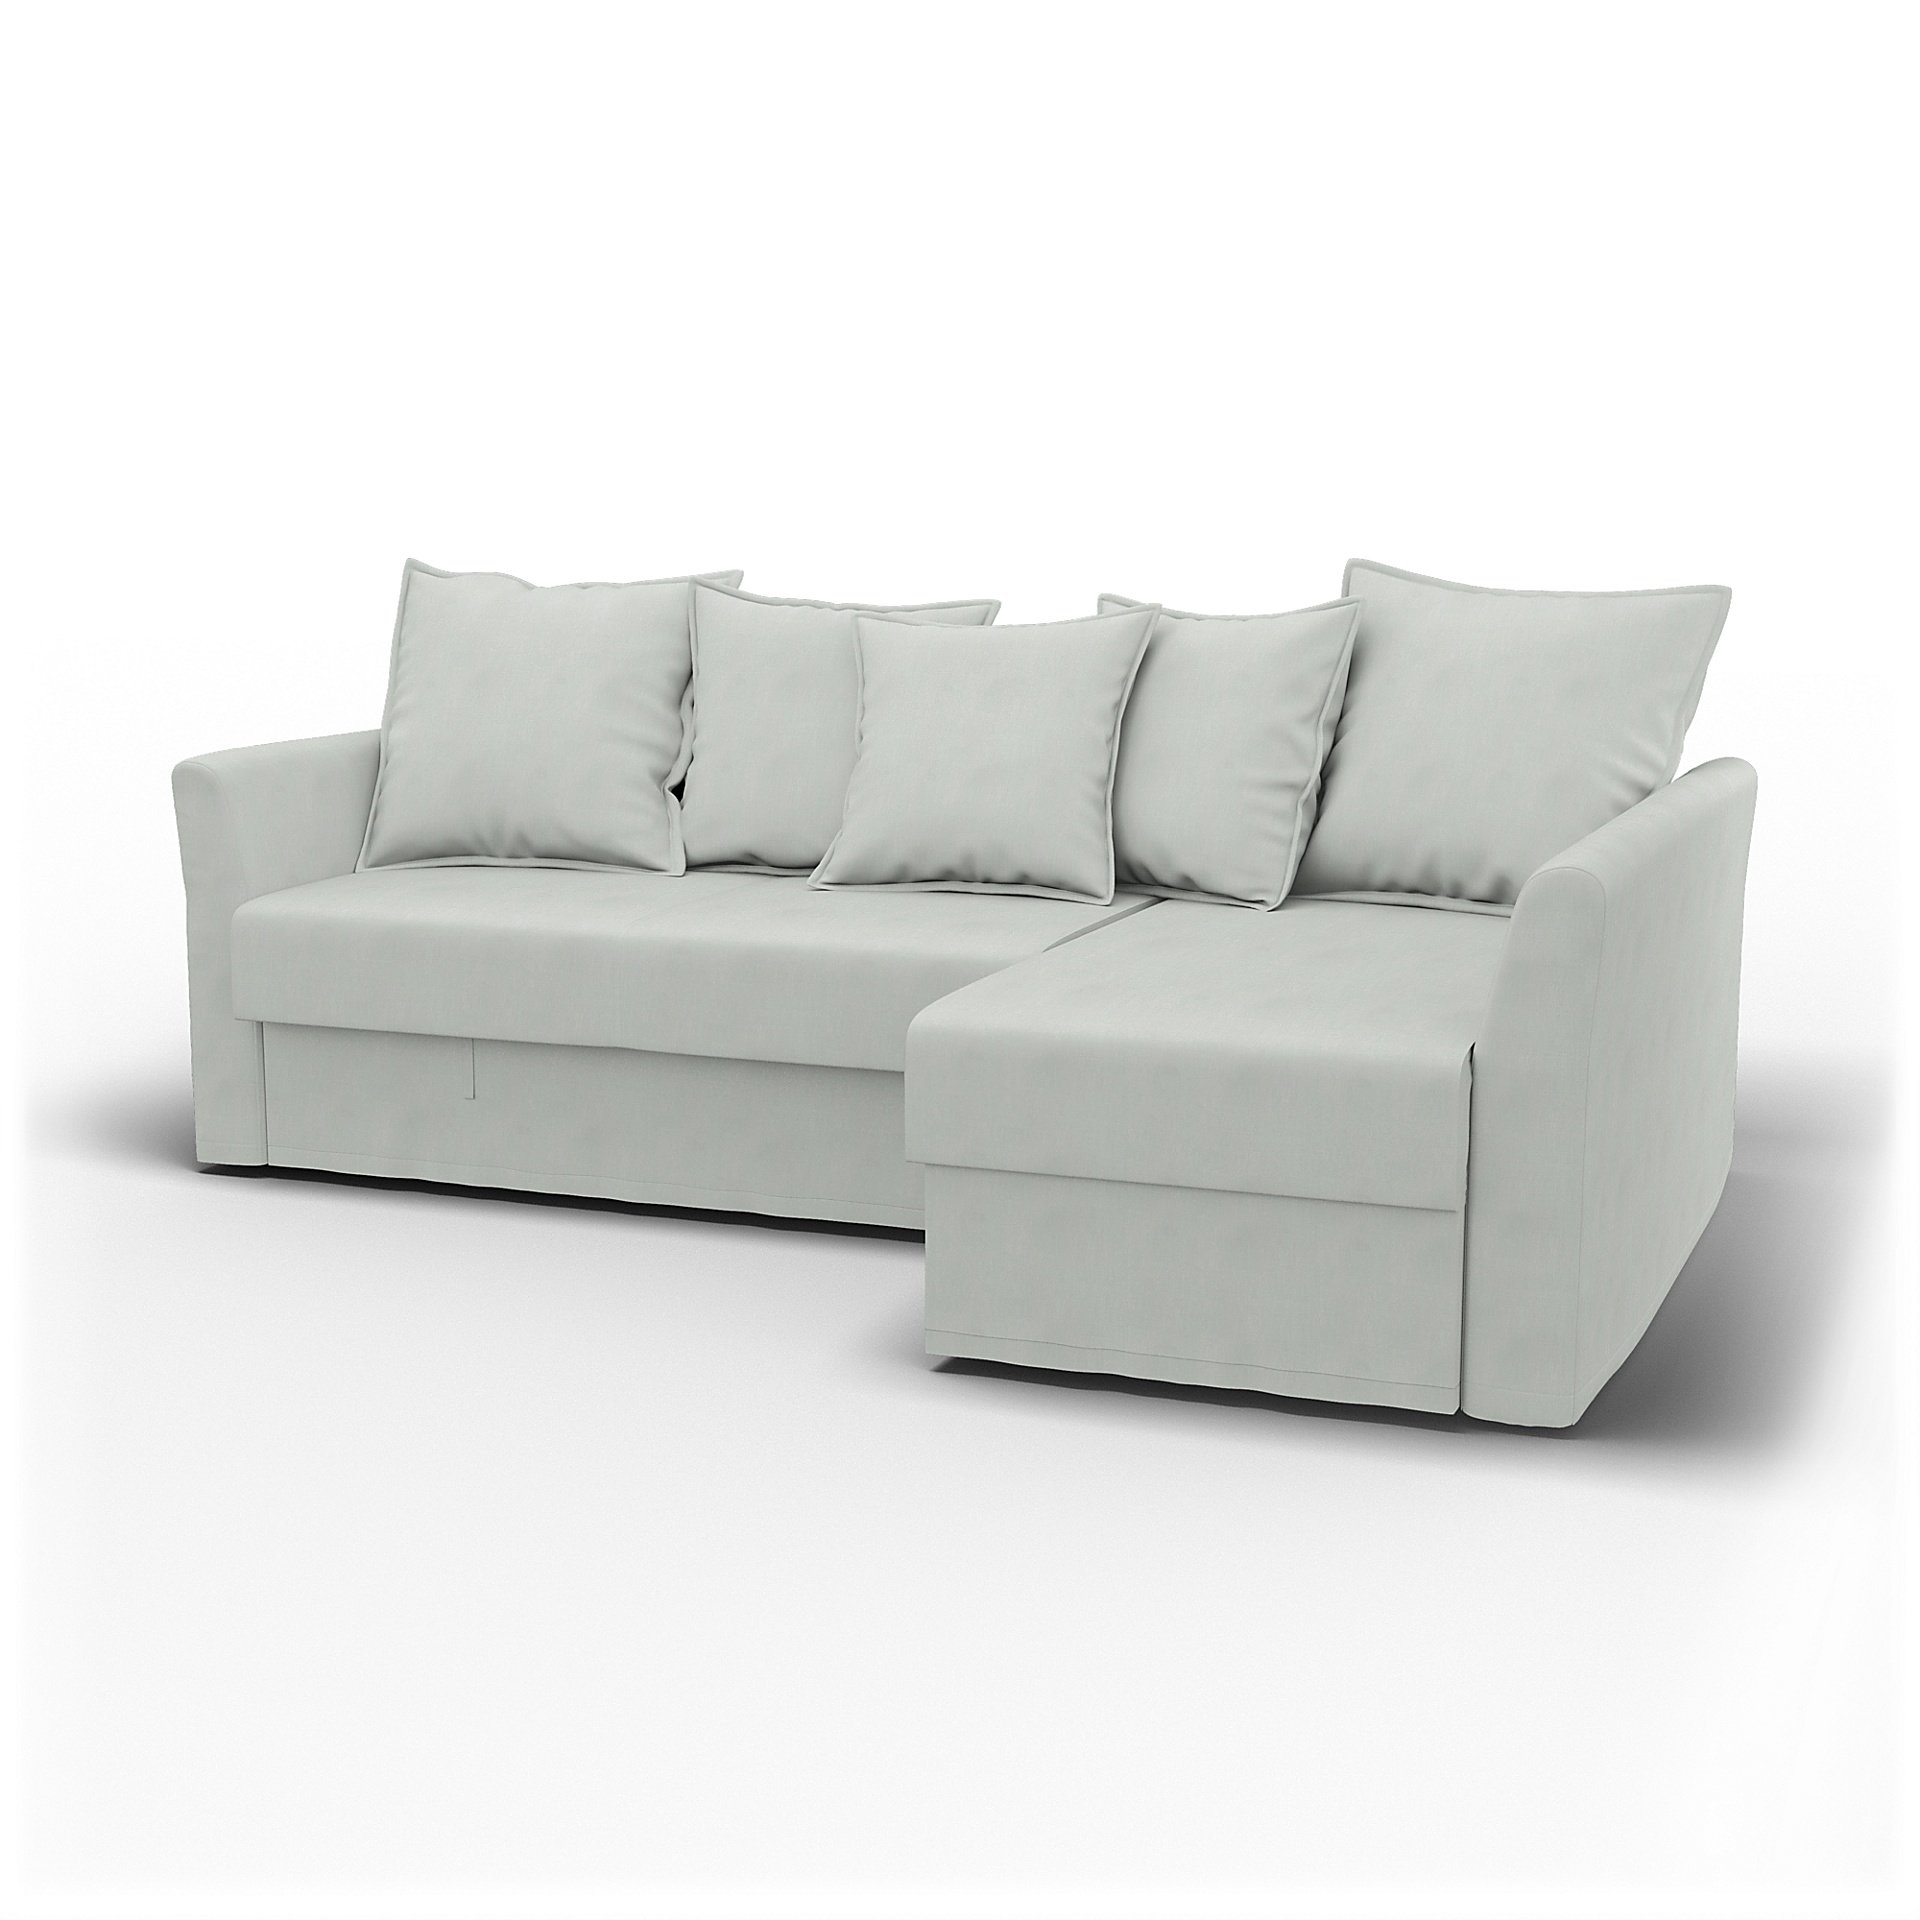 IKEA - Holmsund Sofabed with Chaiselongue, Silver Grey, Linen - Bemz